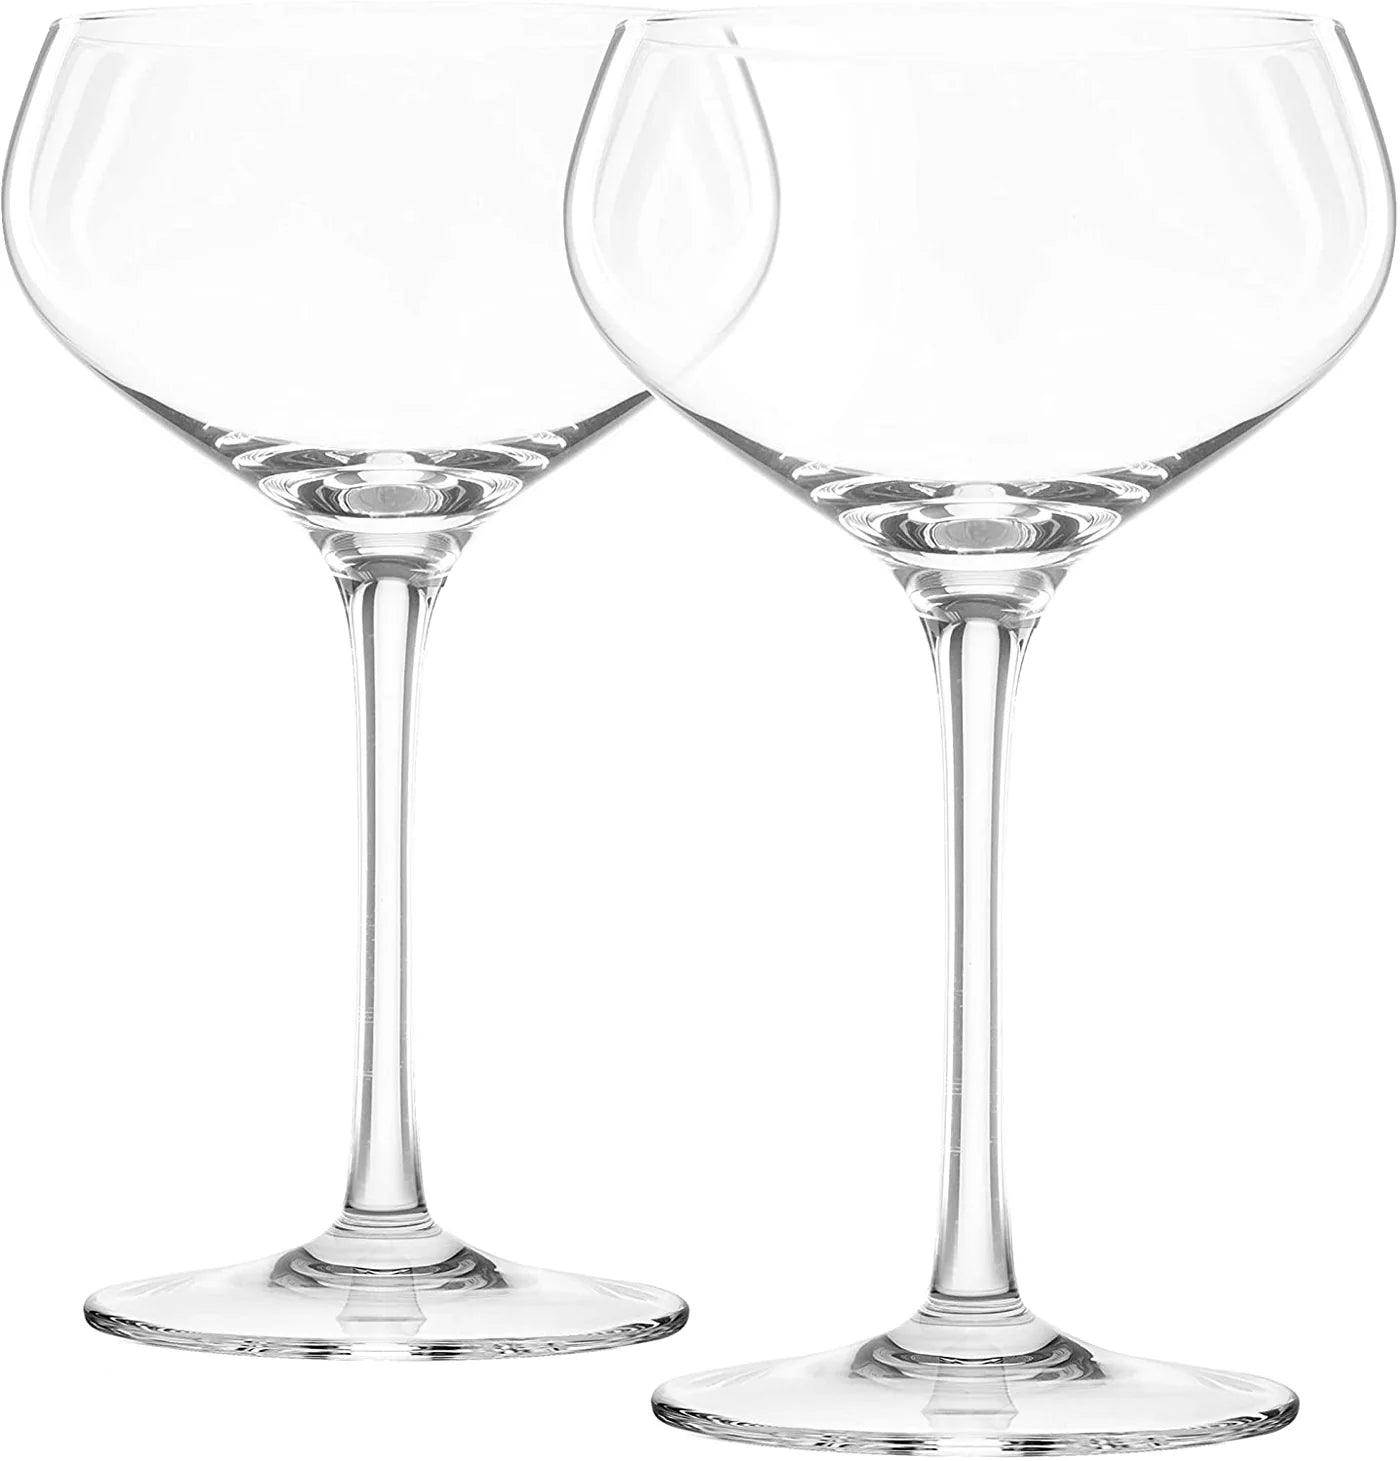 FINAL TOUCH CRYSTAL COUPE GLASSES